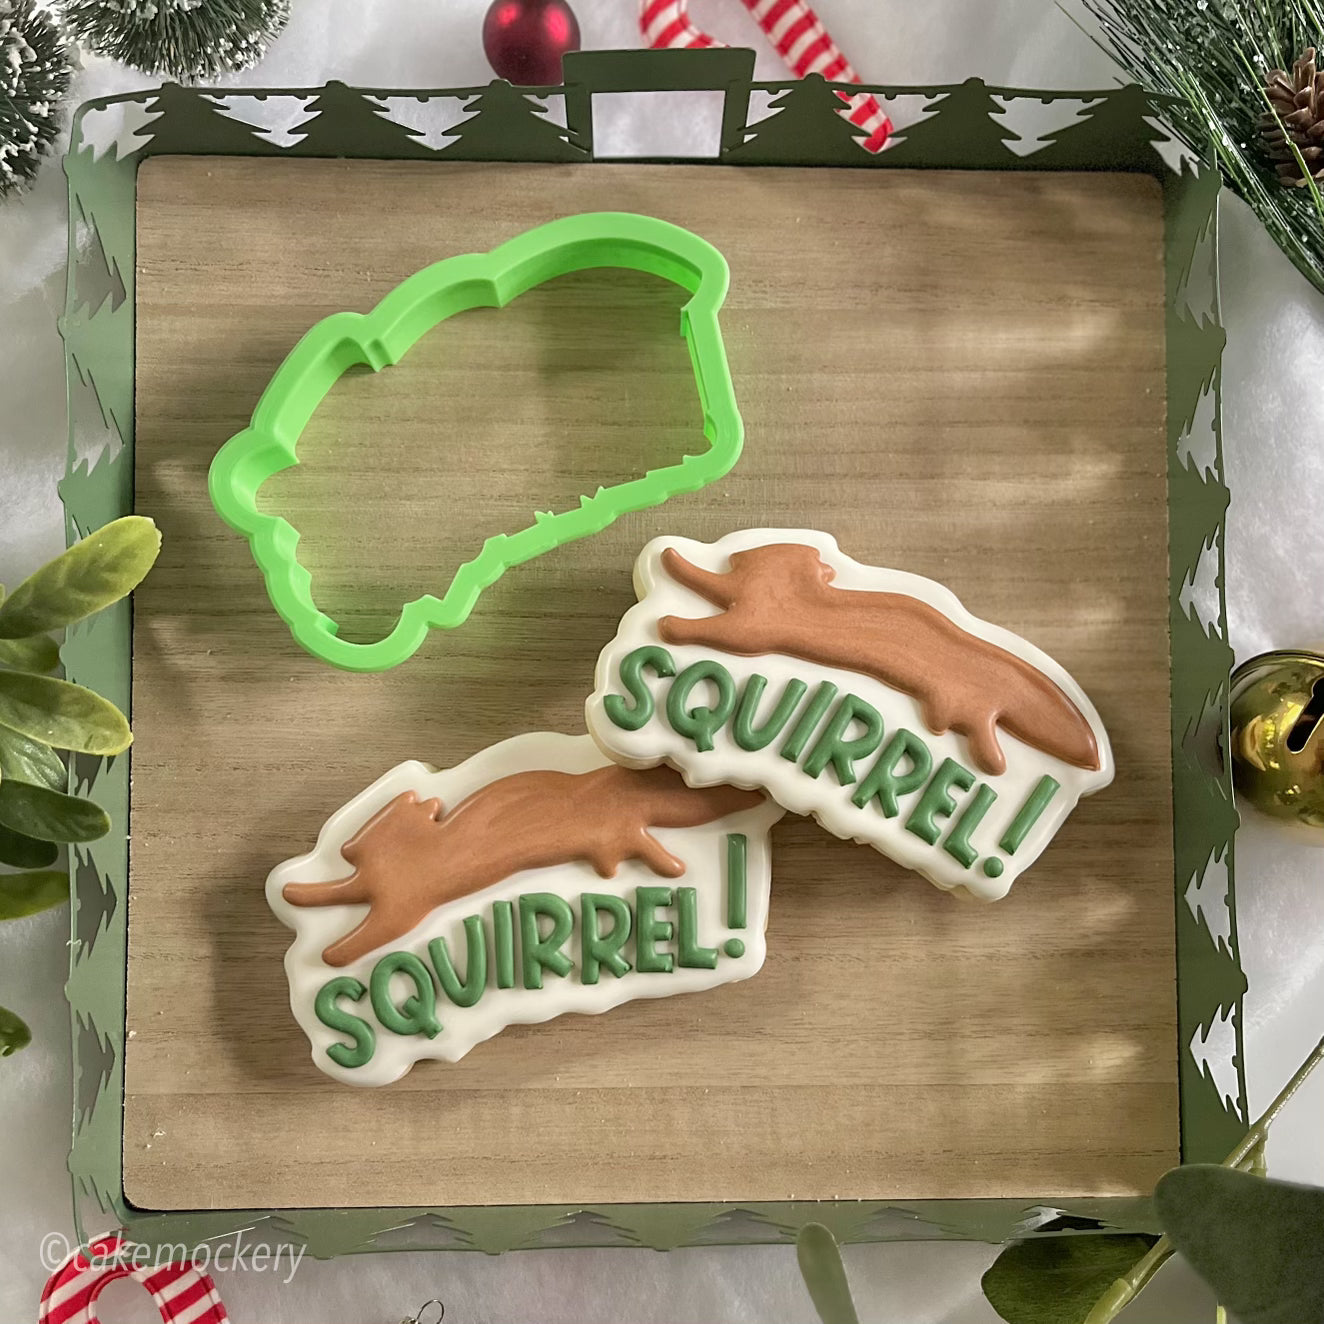 Family Vacation Cookie Cutter Set of 12